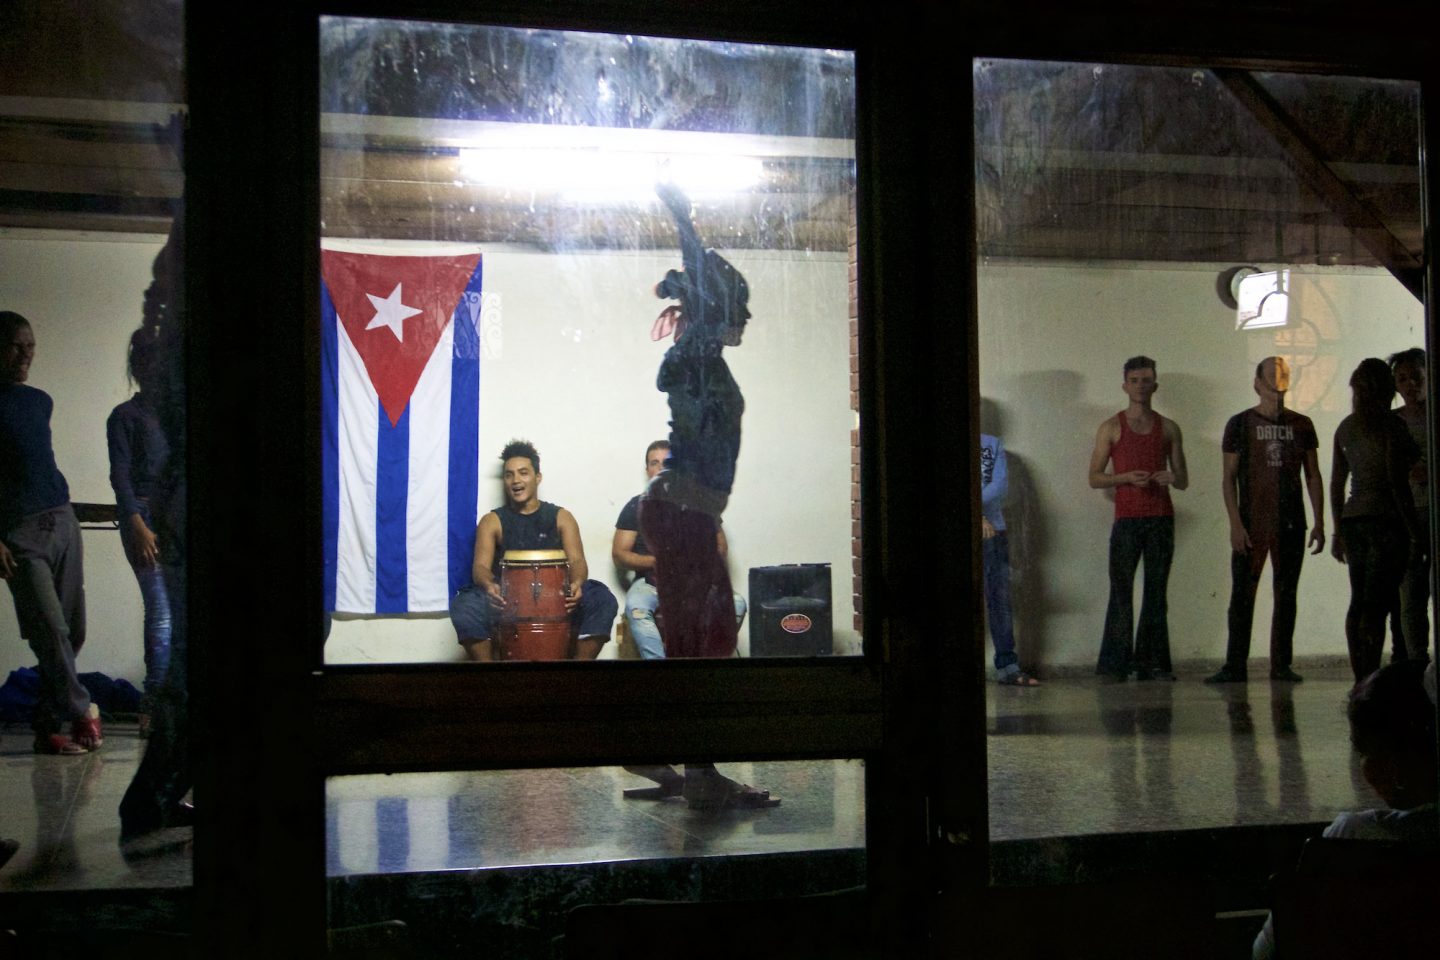 Late night dance lessons in Havana. Daily life in Cuba.